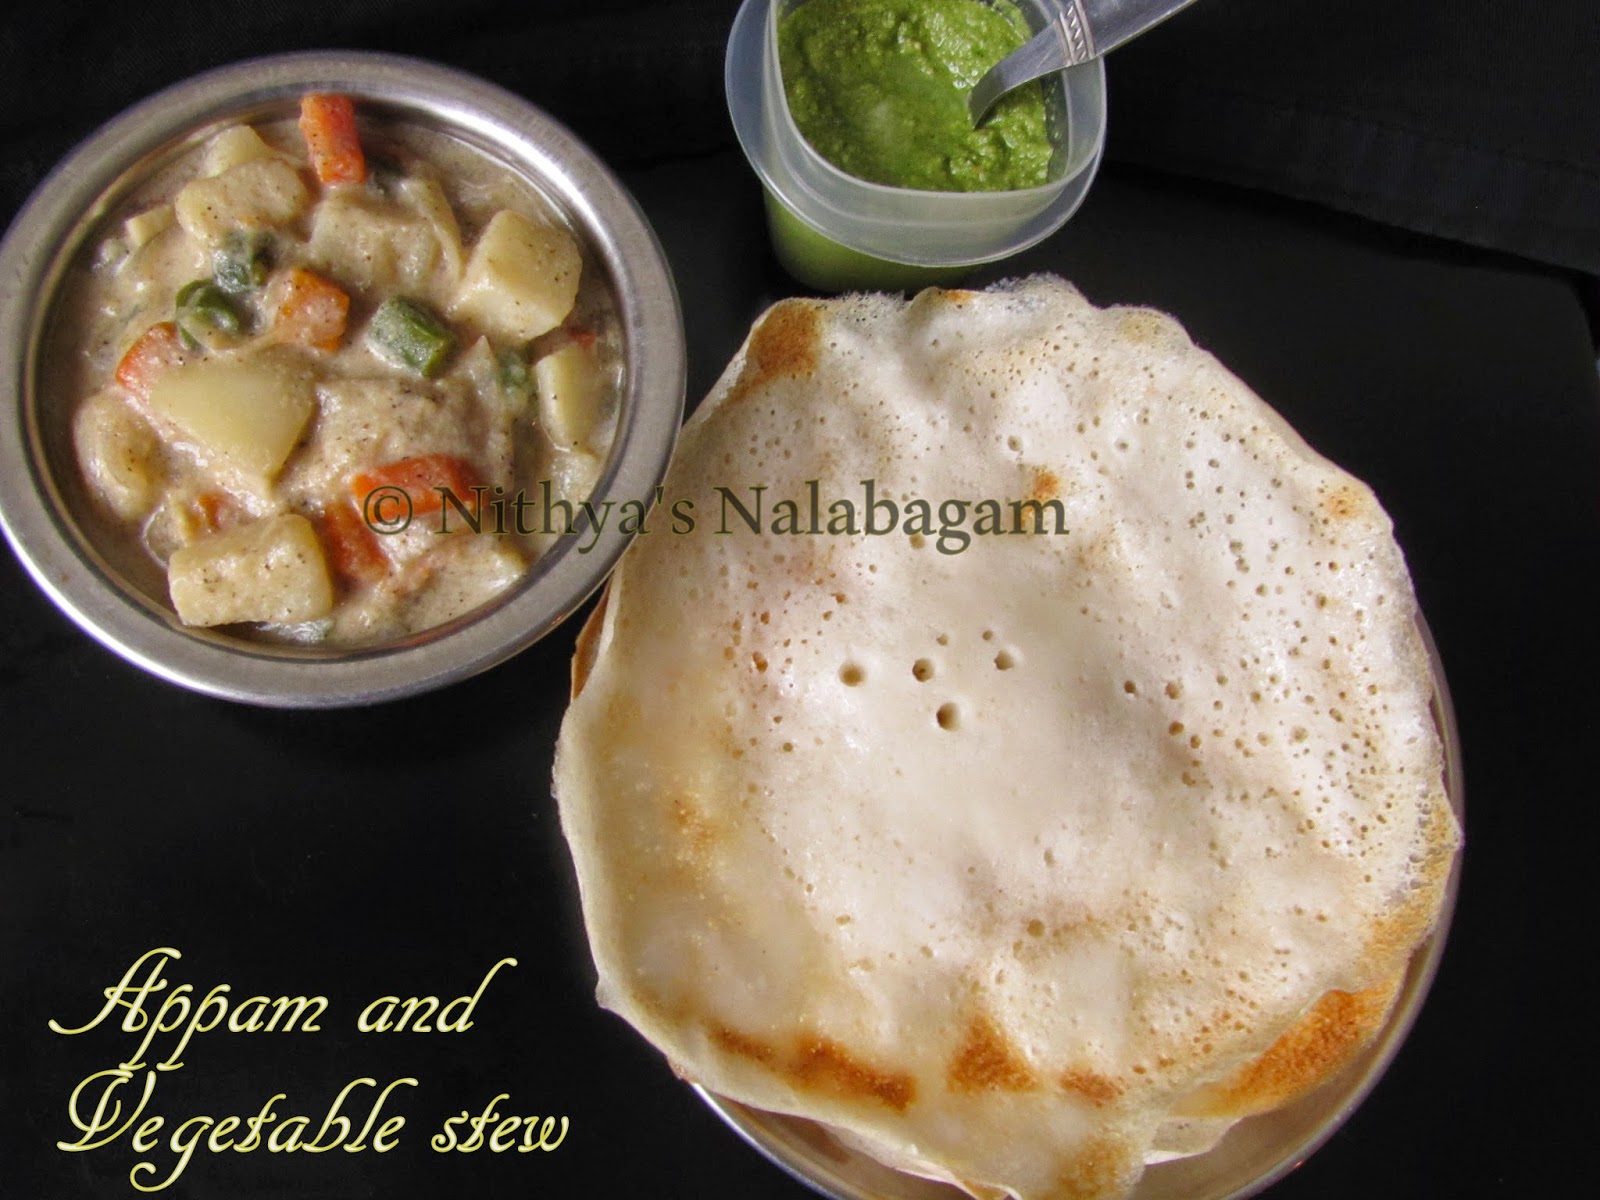 Appam and vegetable stew